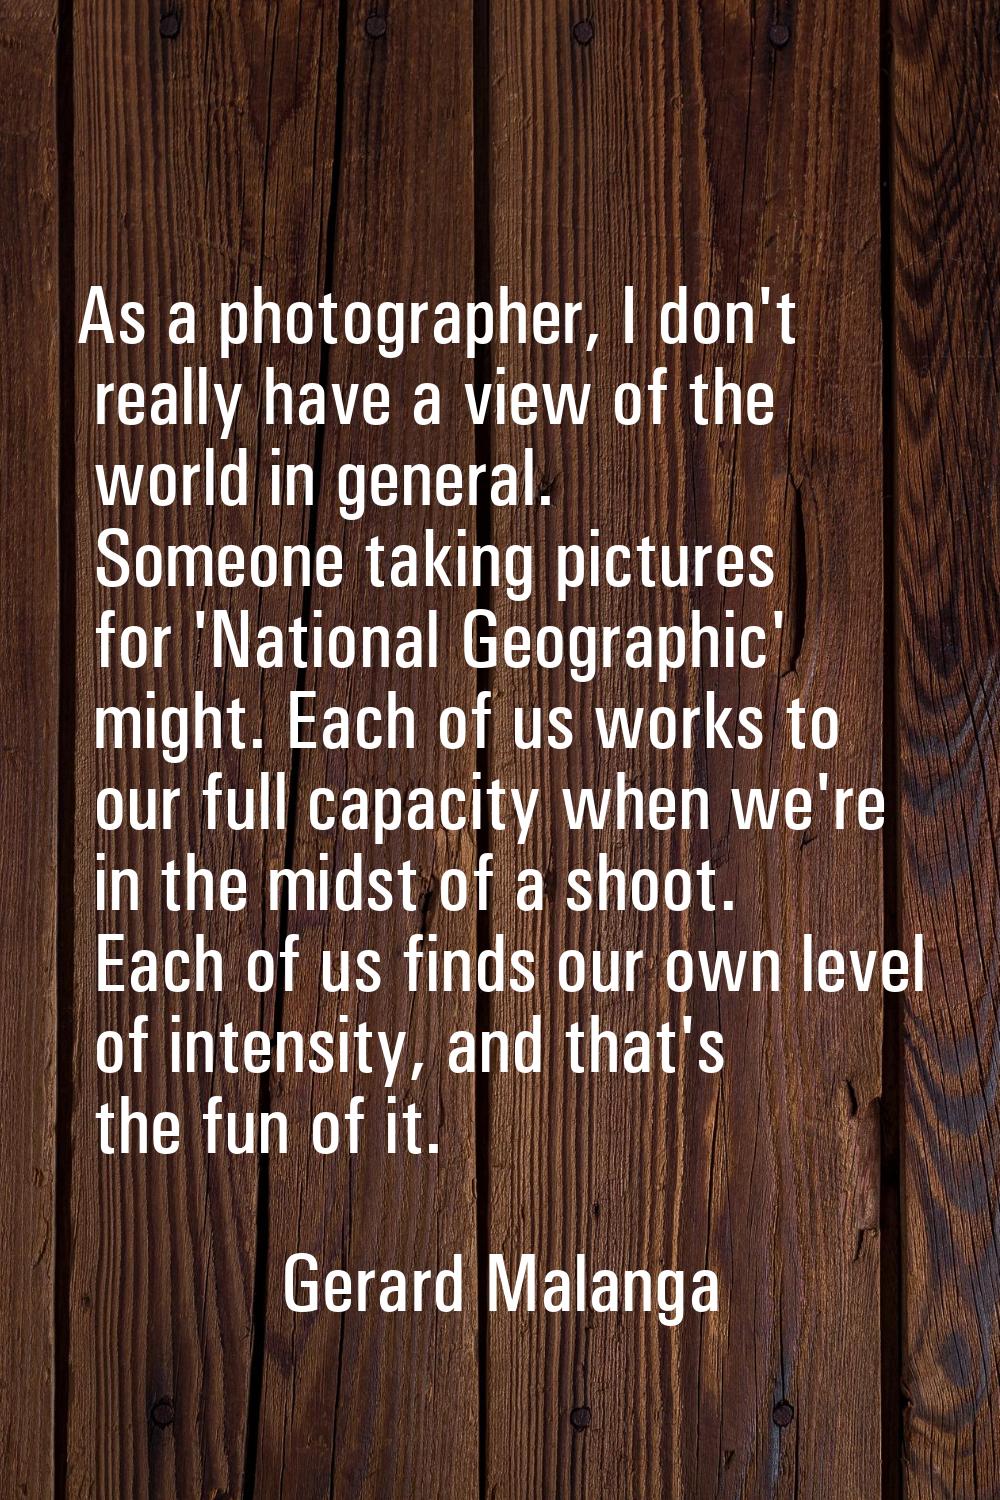 As a photographer, I don't really have a view of the world in general. Someone taking pictures for 